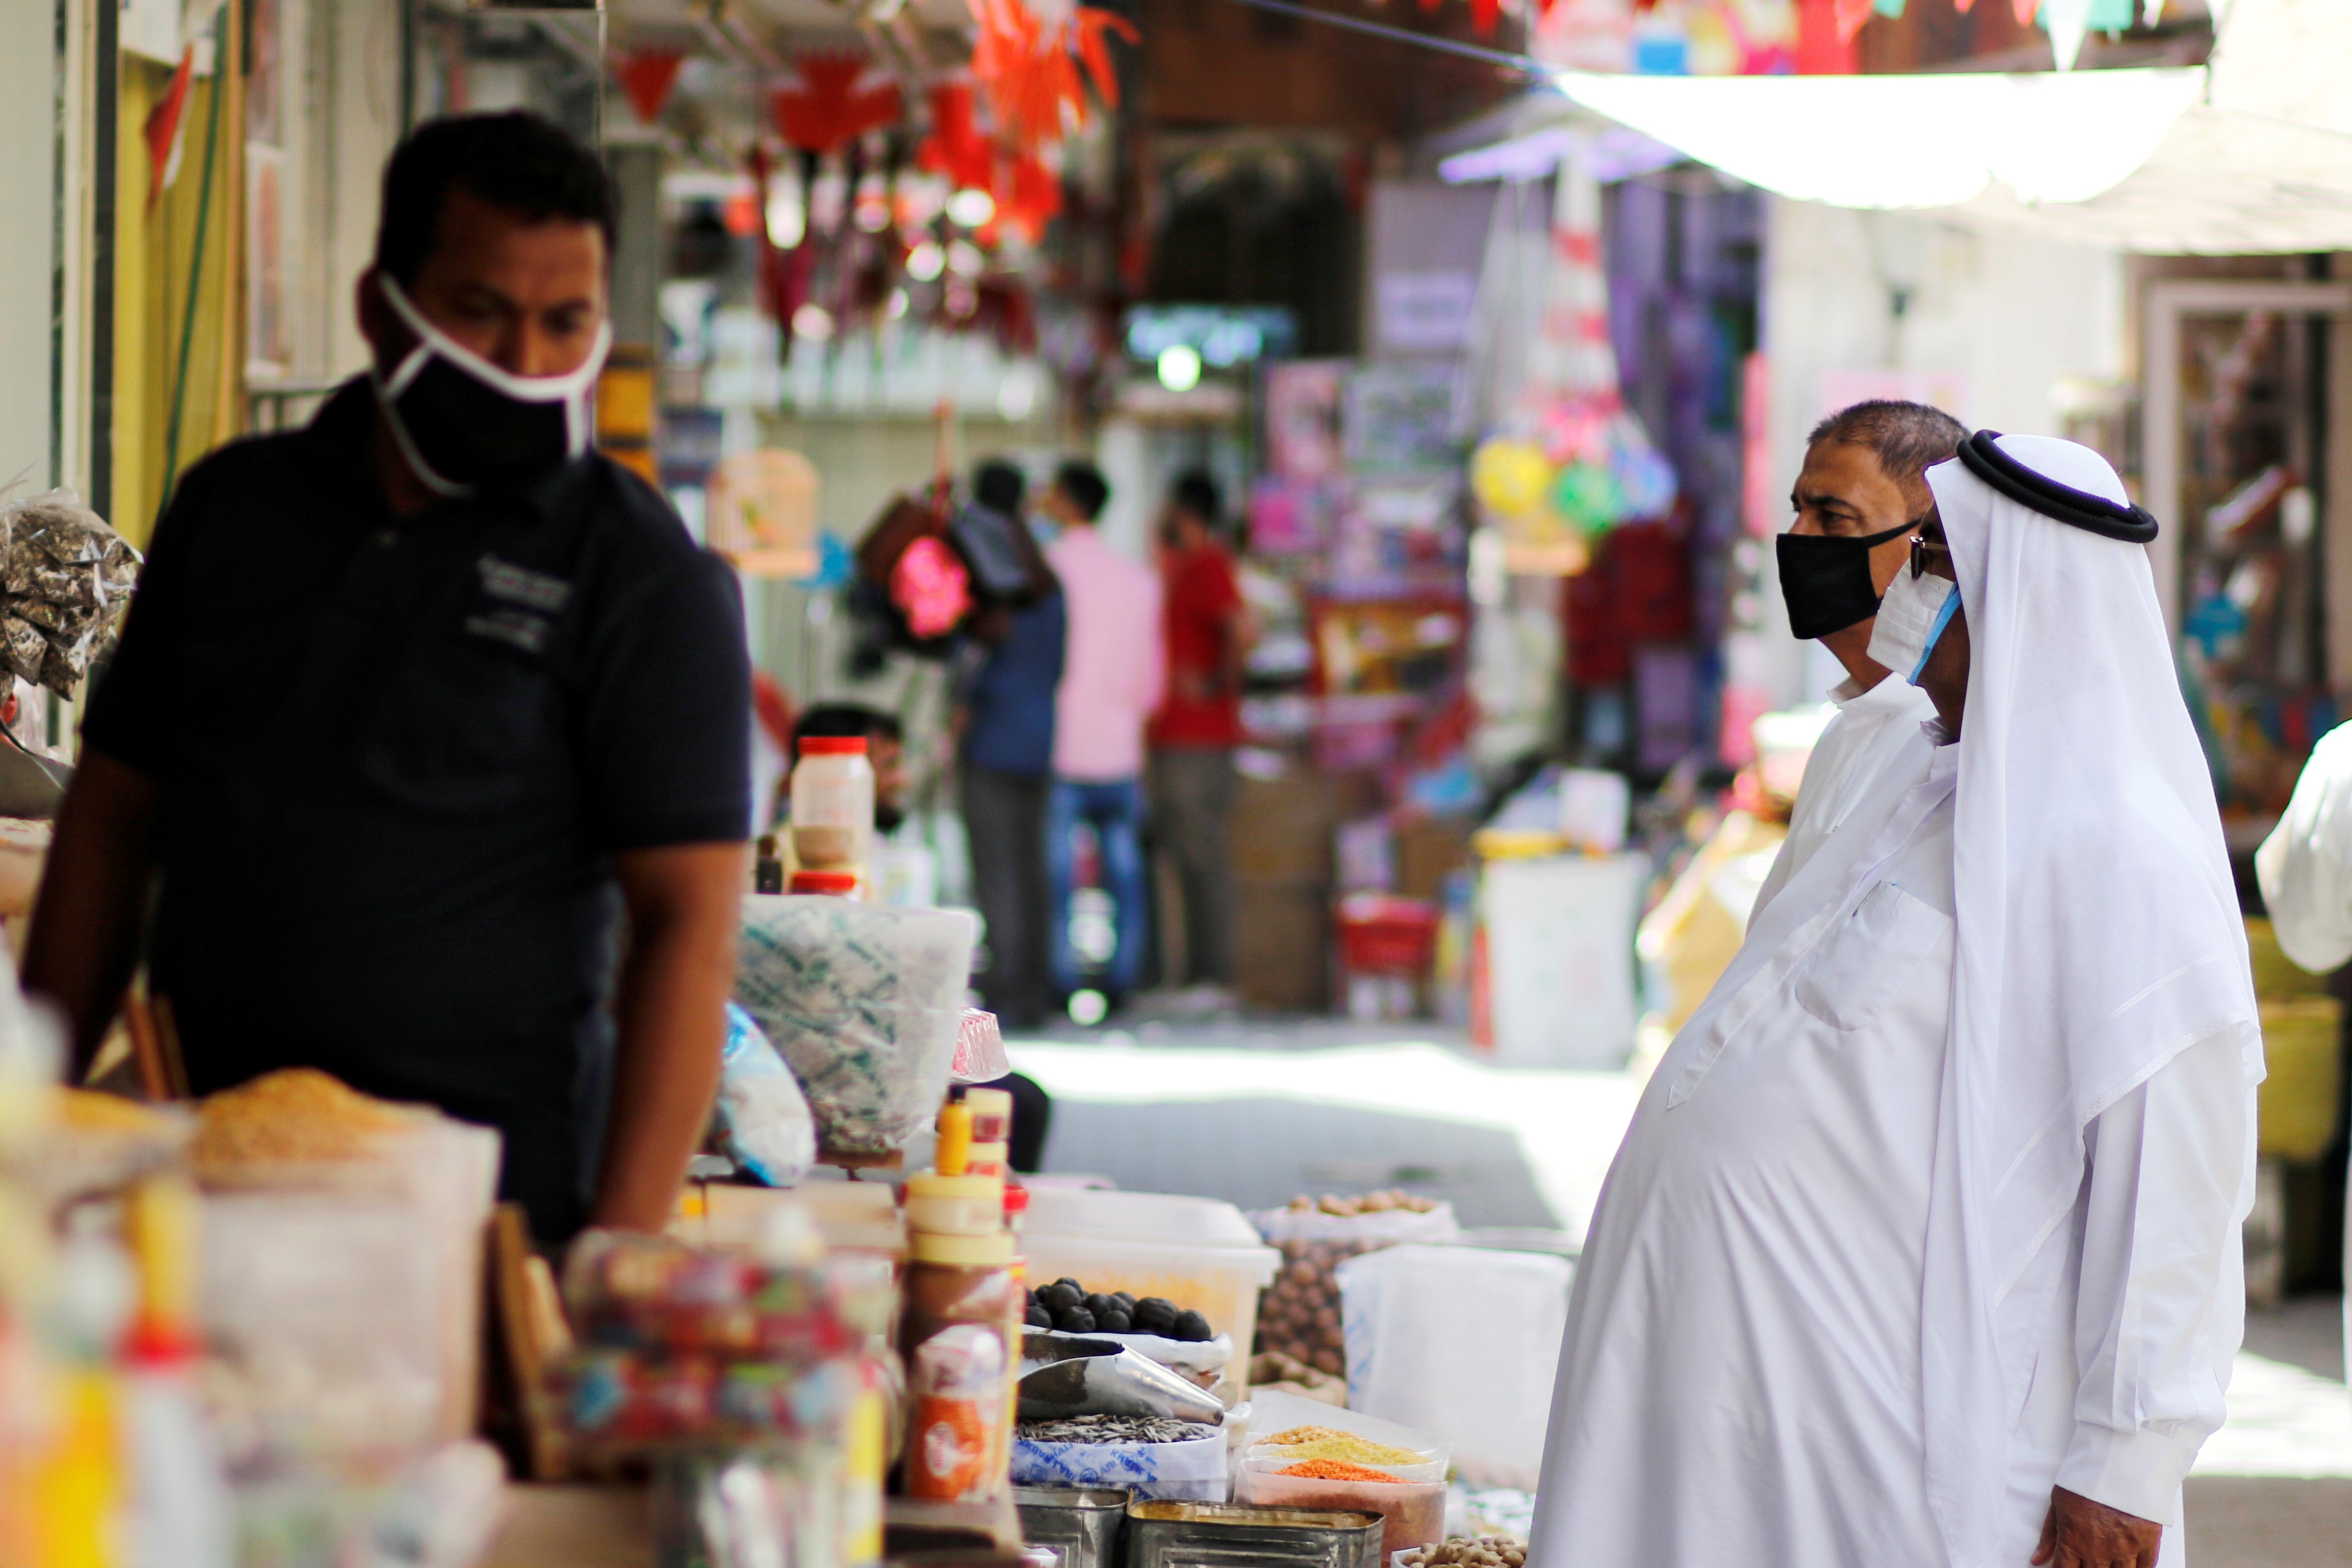 People wear protective face masks following the outbreak of the coronavirus disease (COVID-19), as they shop ahead of the holy month of Ramadan in Manama, Bahrain, April 23, 2020